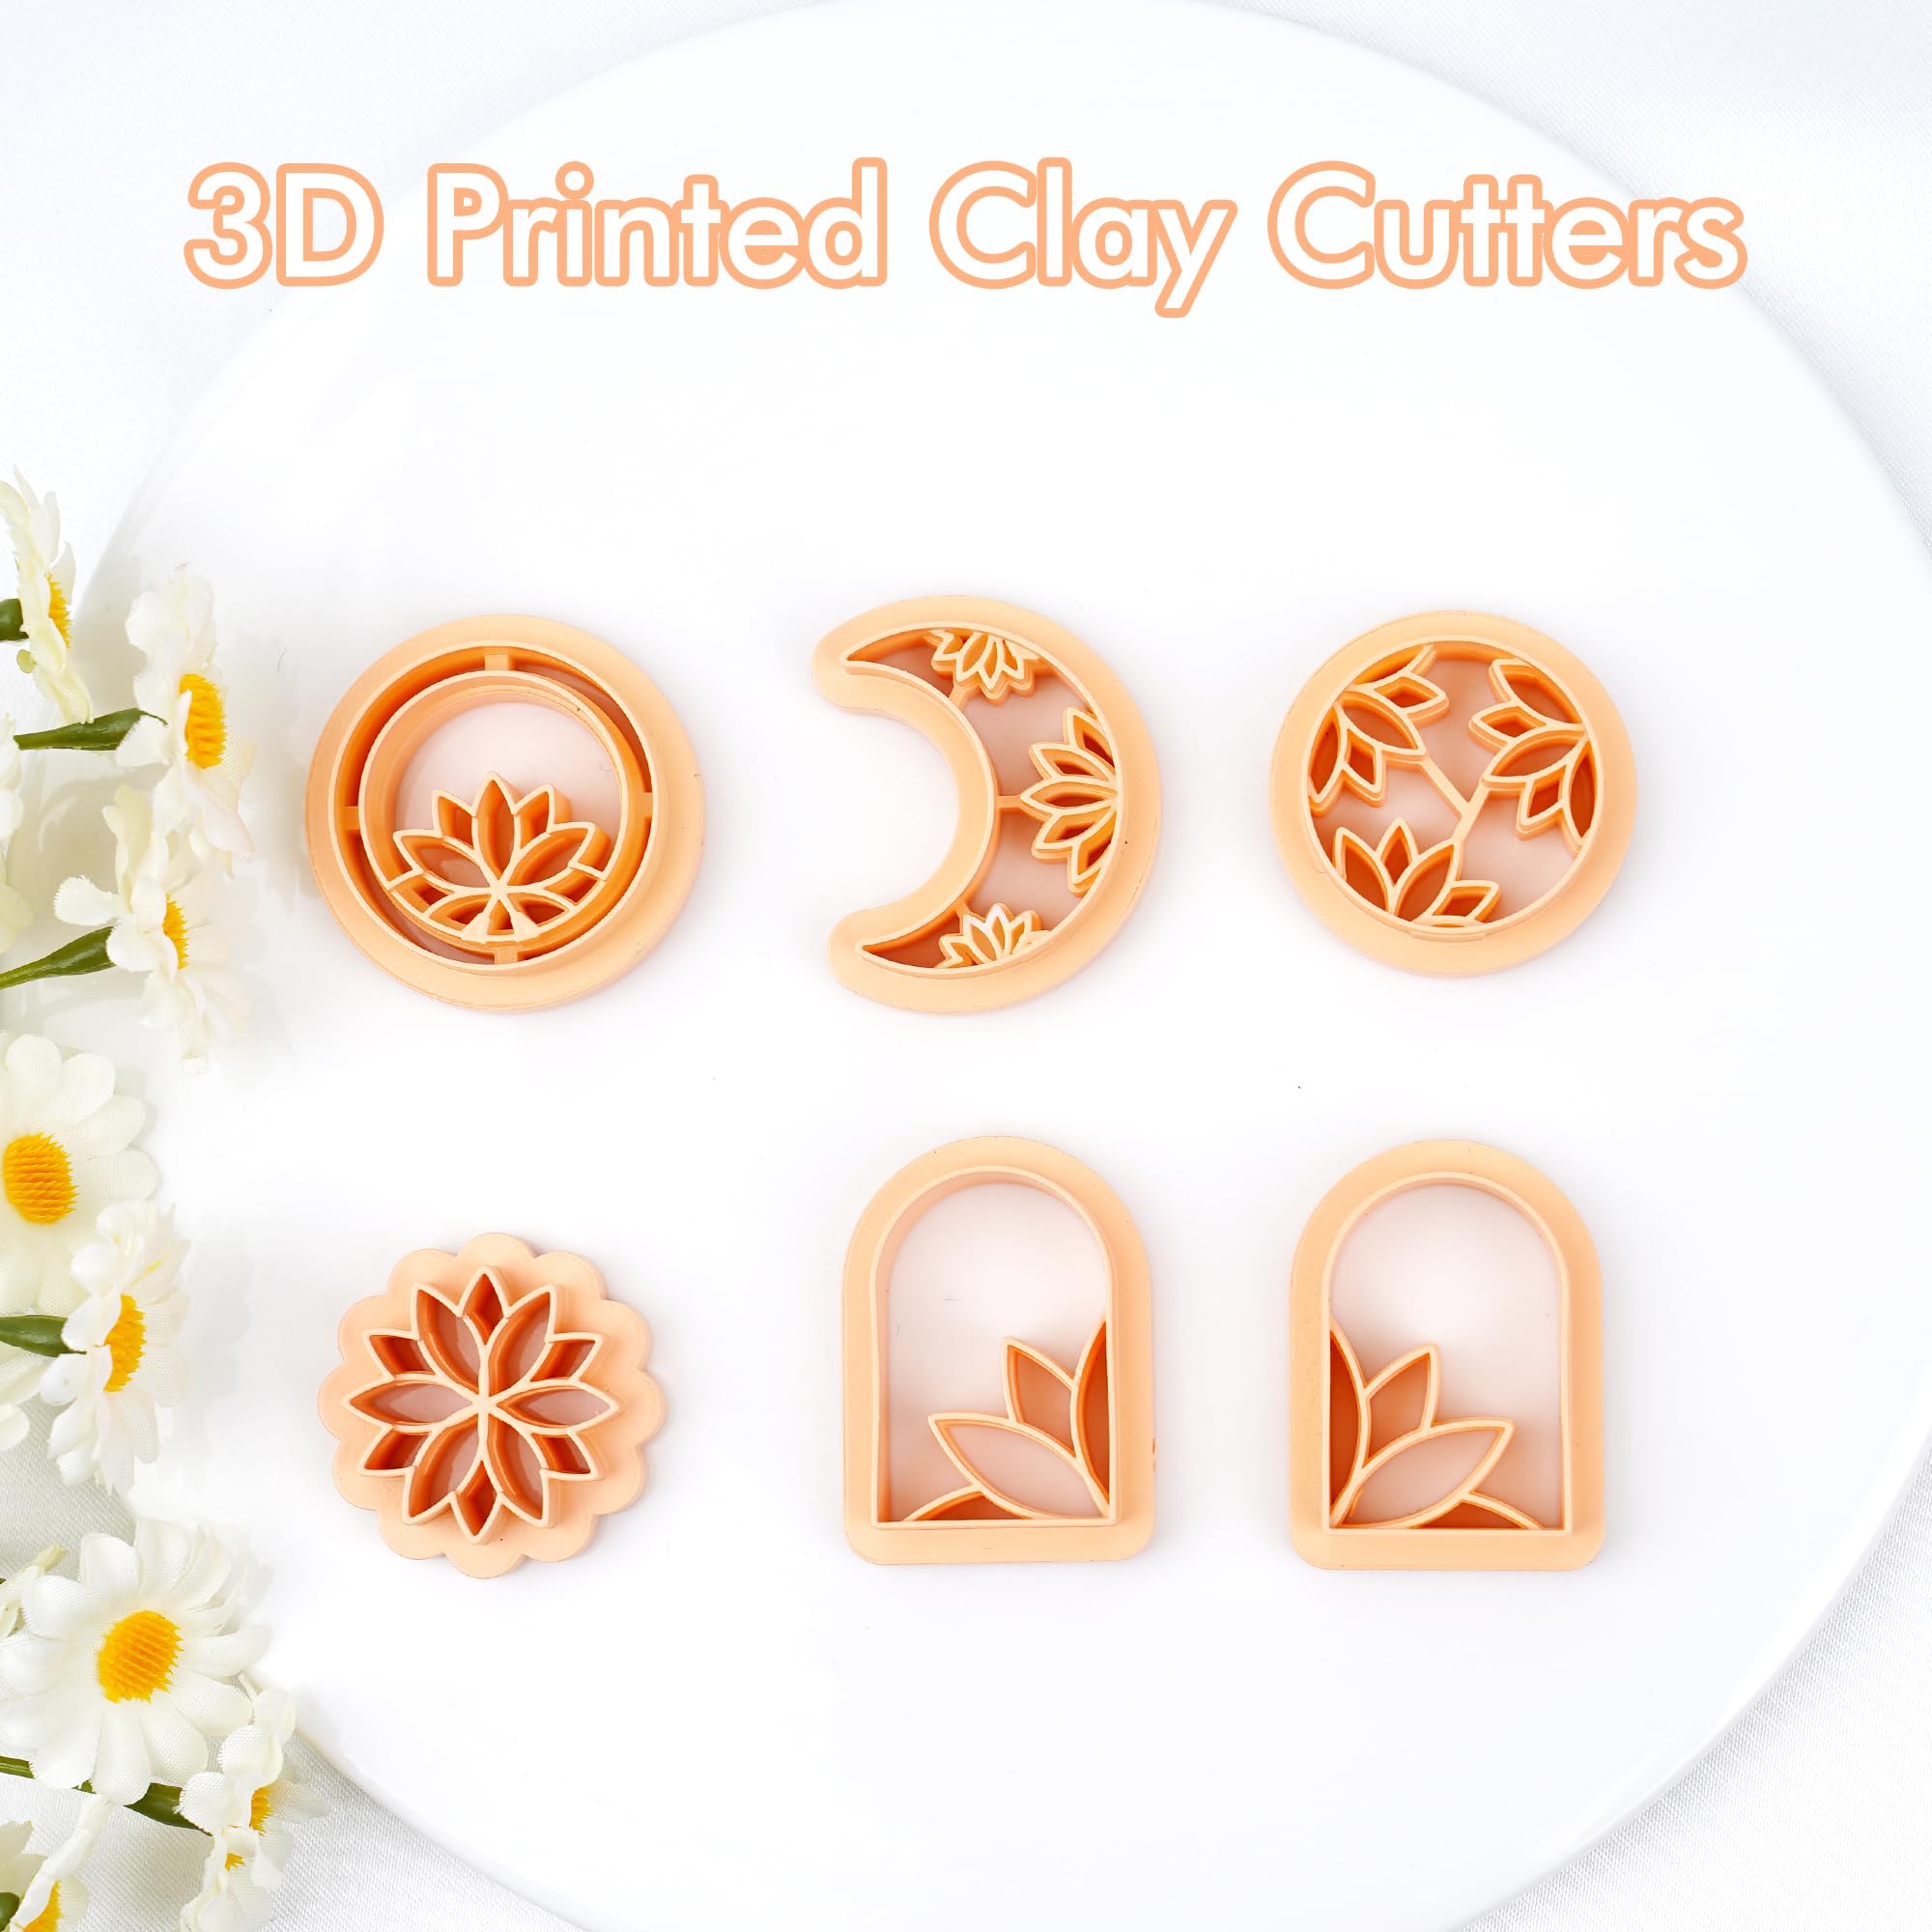 EYE Shapes Set of 7 Pieces - 3D Printed Cutters For Polymer Clay